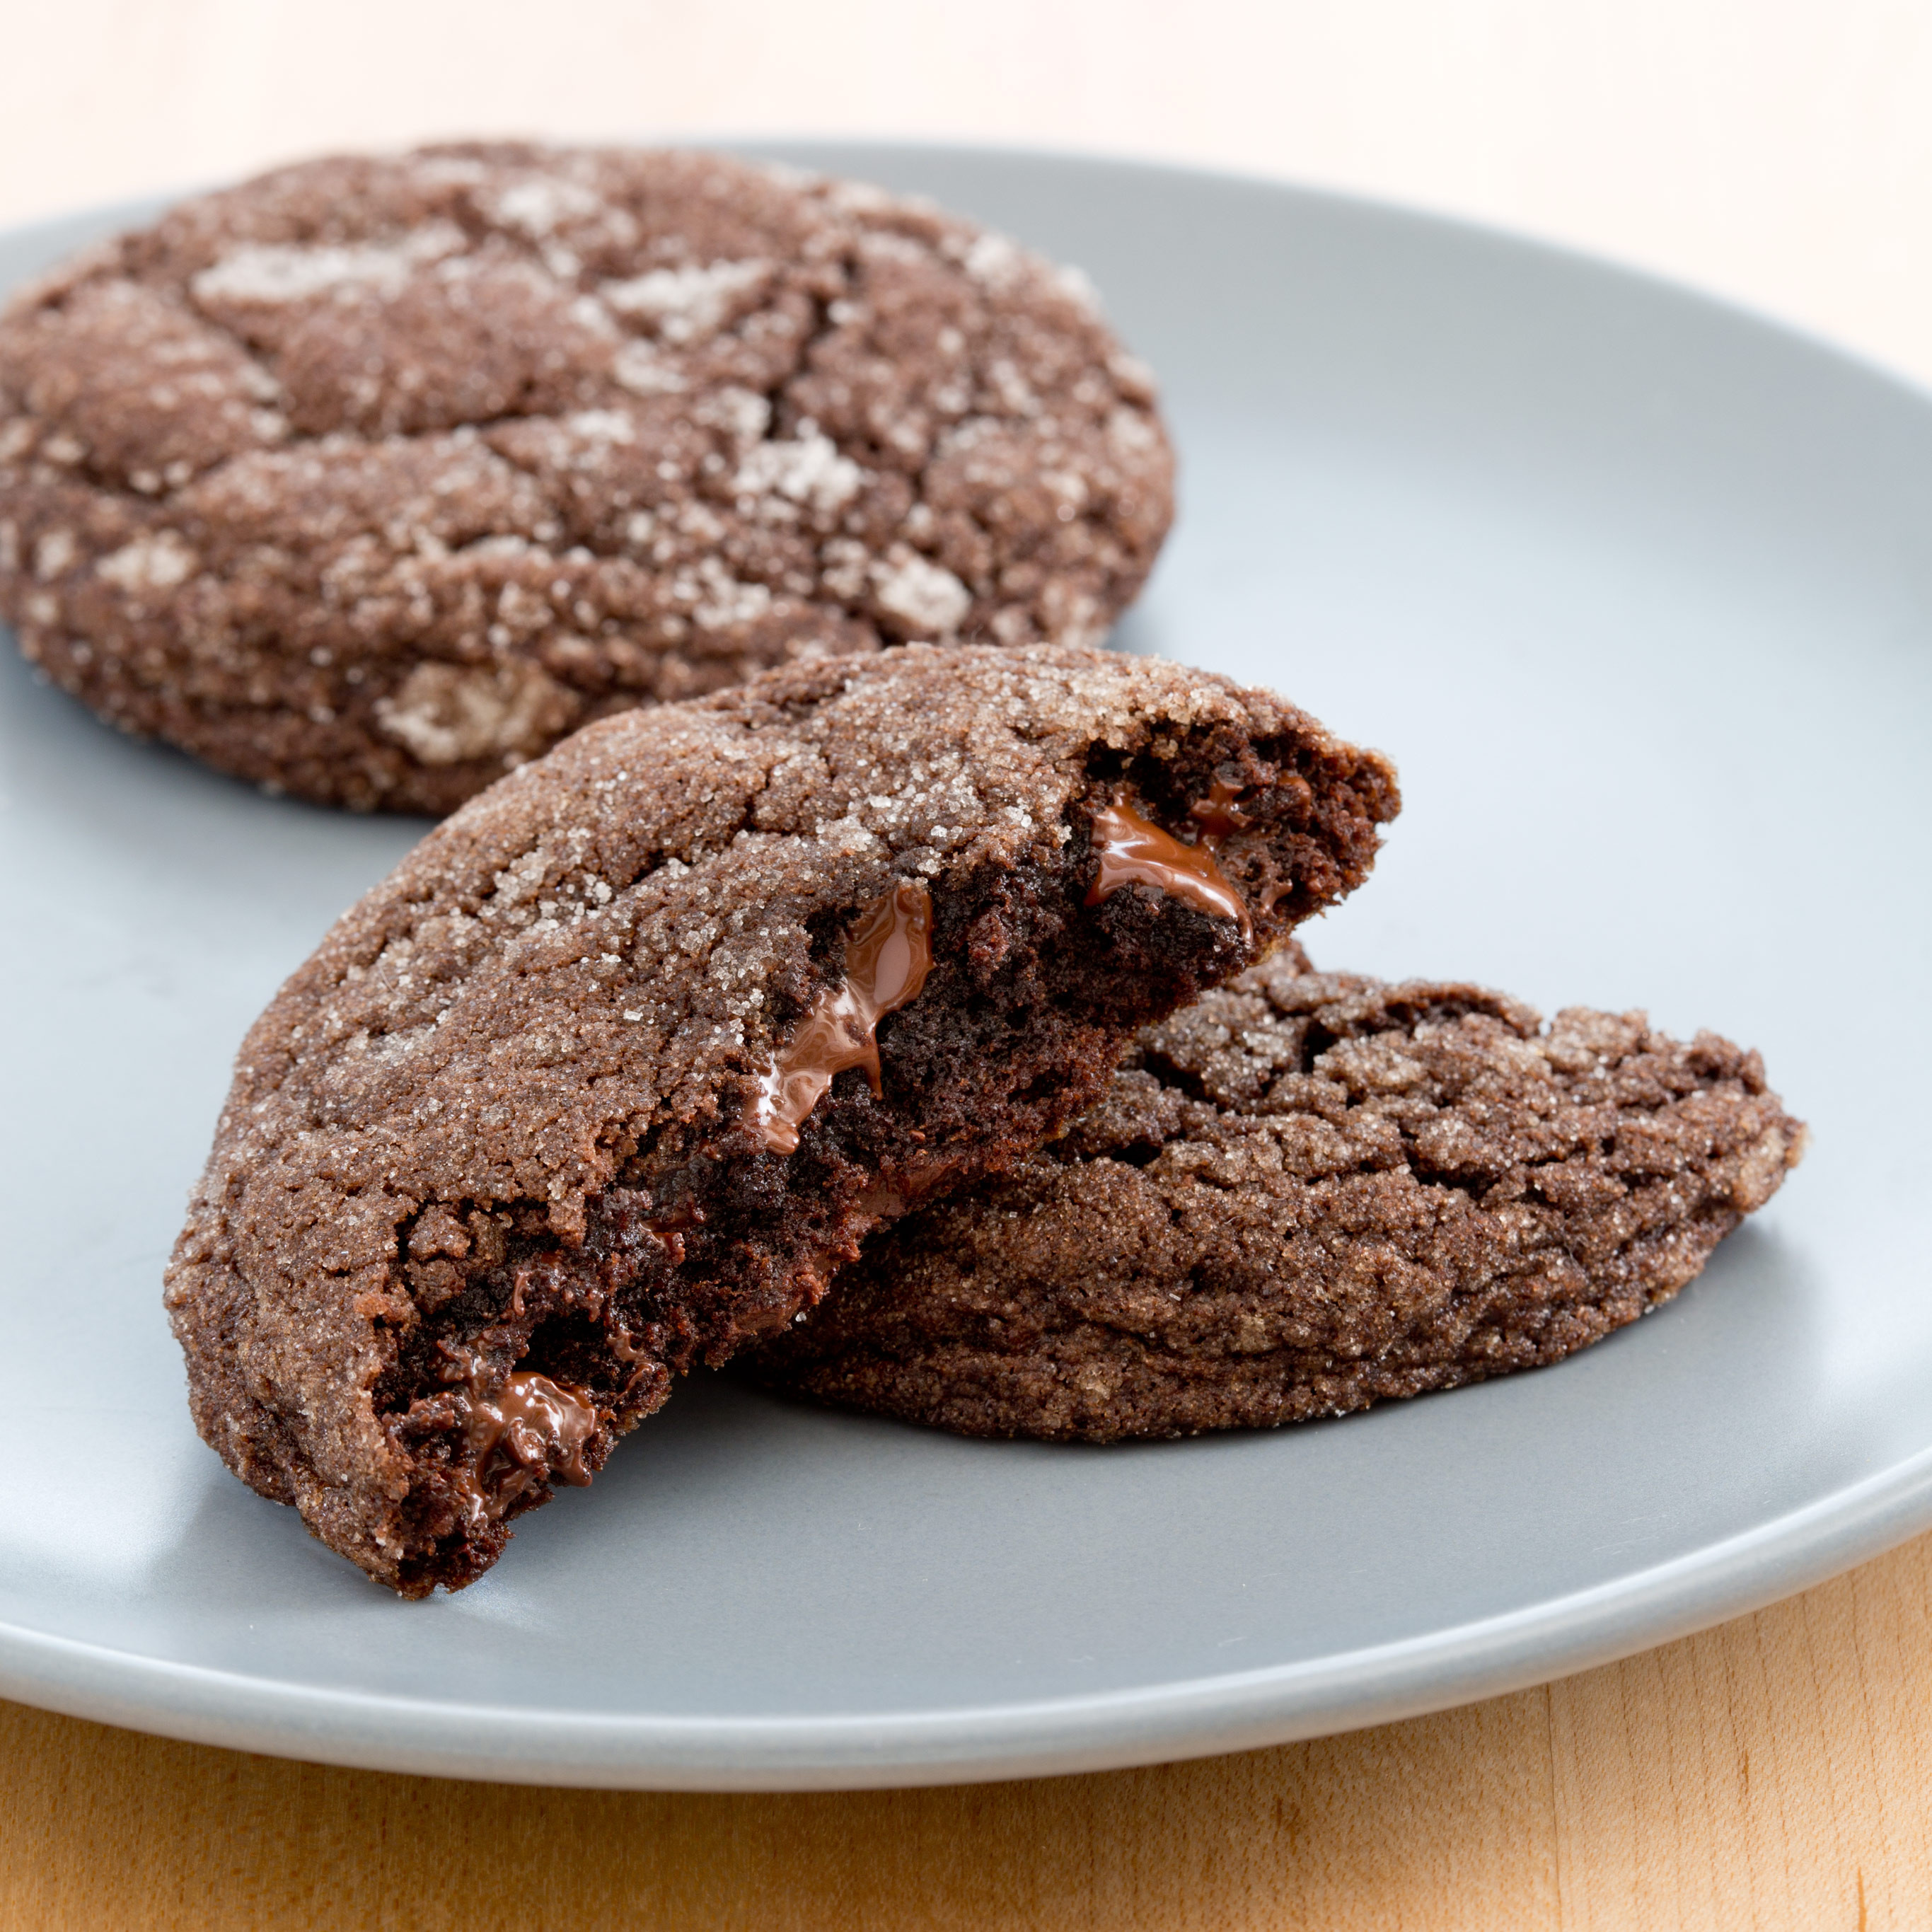 Americas Test Kitchen Christmas Cookies
 Chewy Chocolate Cookies